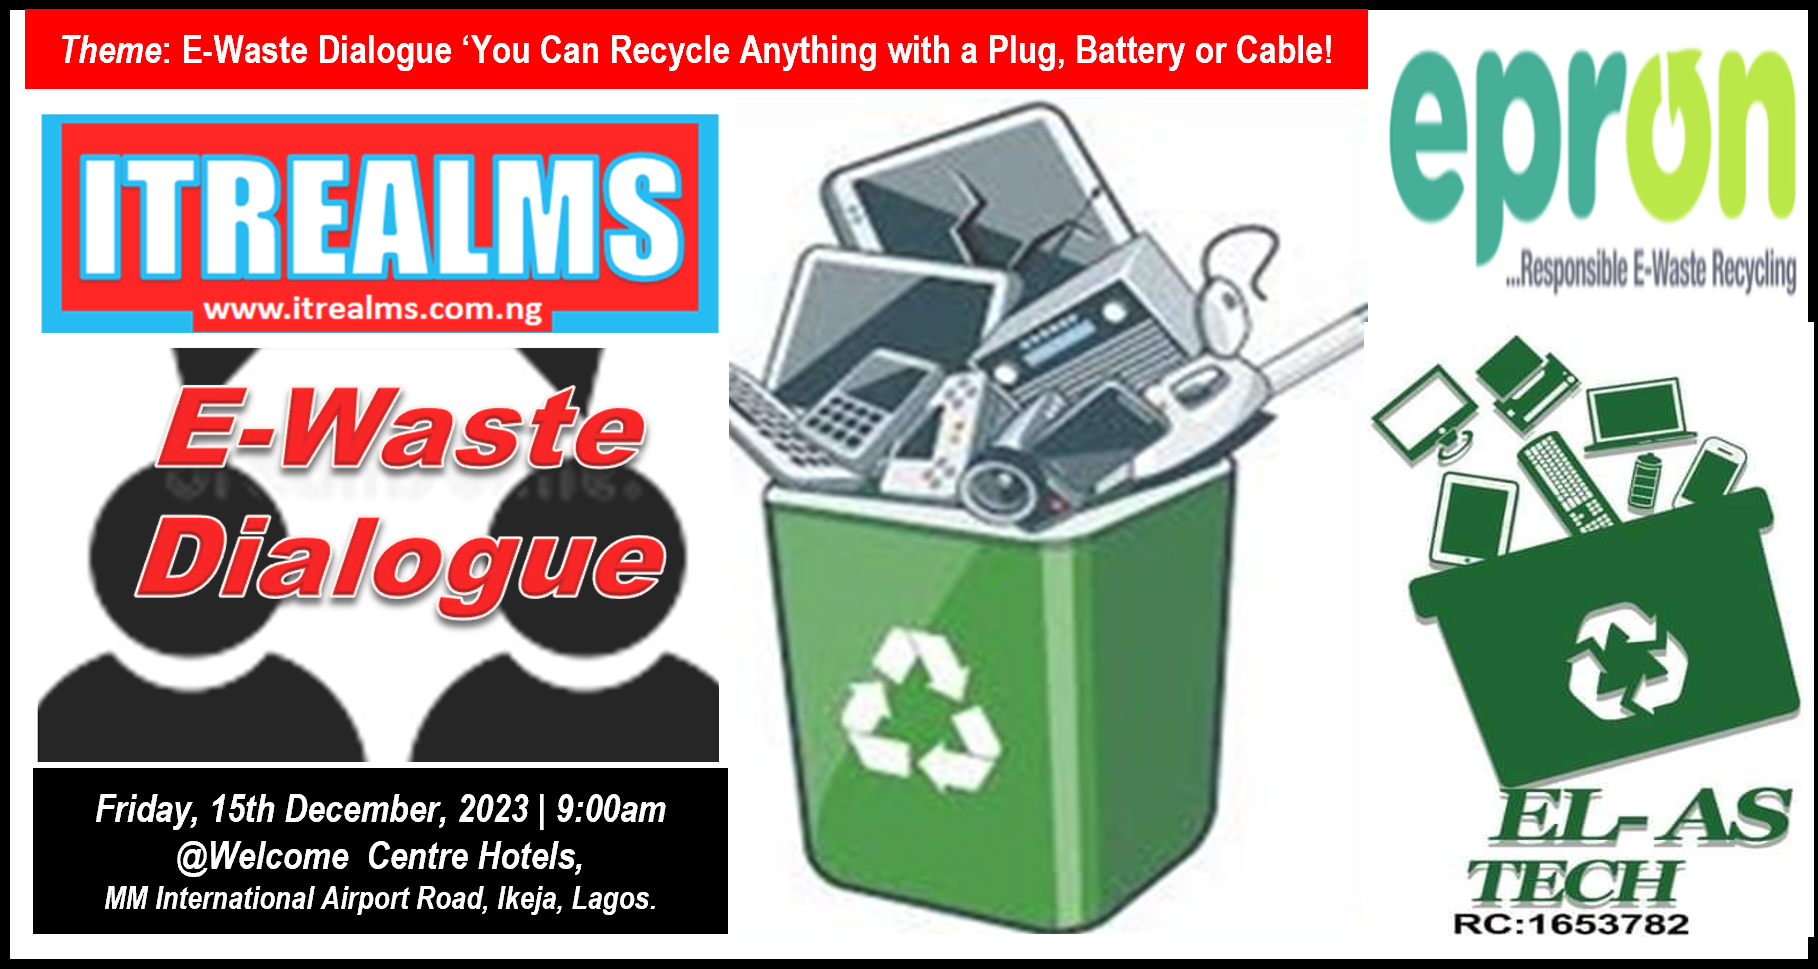 ITREALMS E-Waste Dialogue’23 partners EPRON, EL-AS Tech, WEE-Eco to collect small e-waste